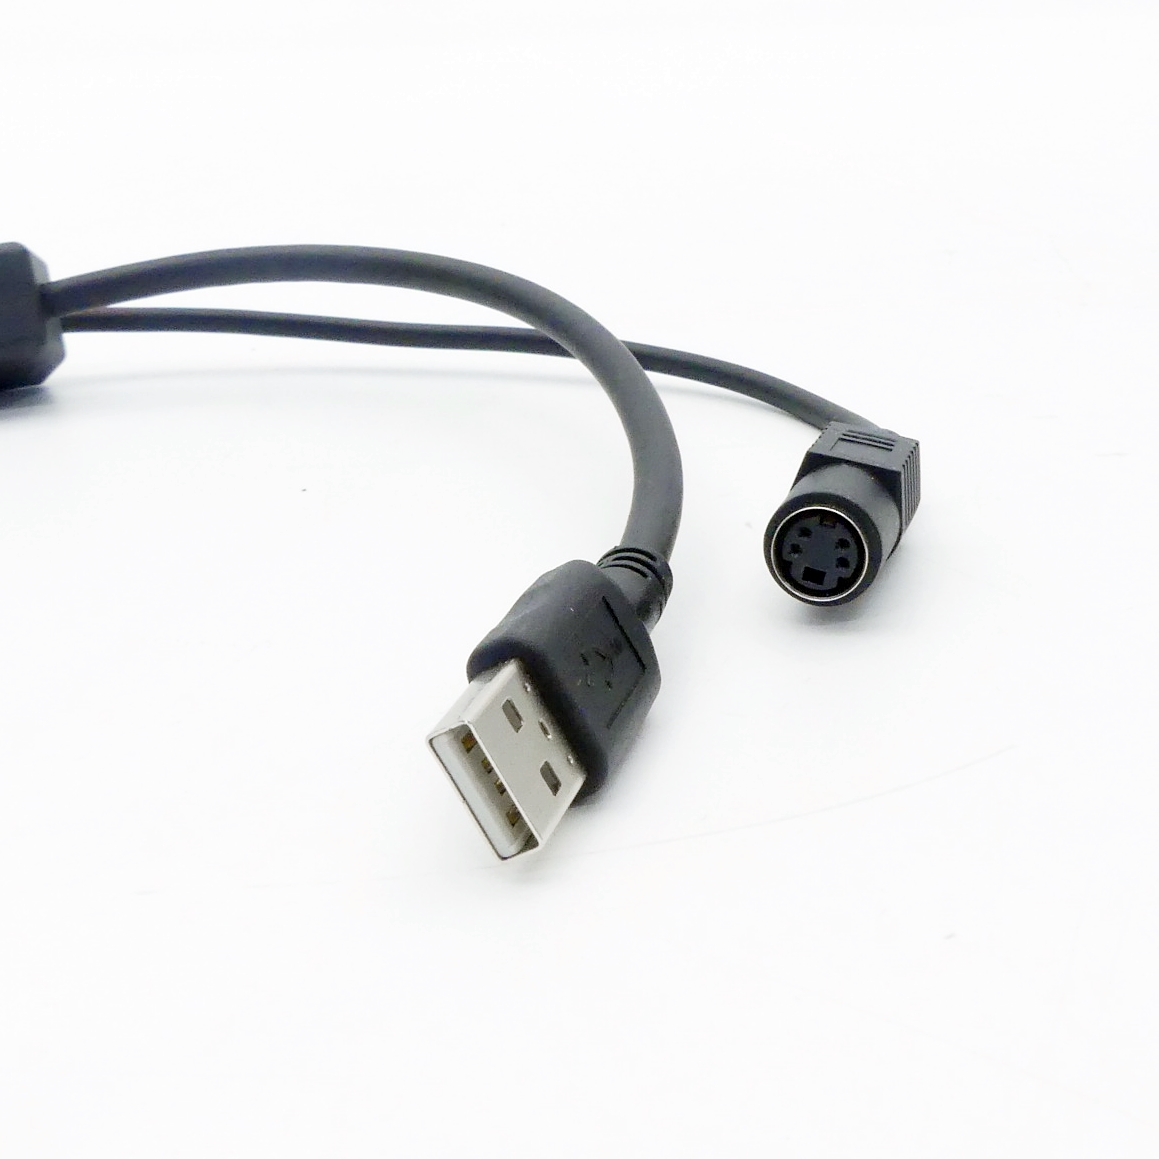 USB Cable 